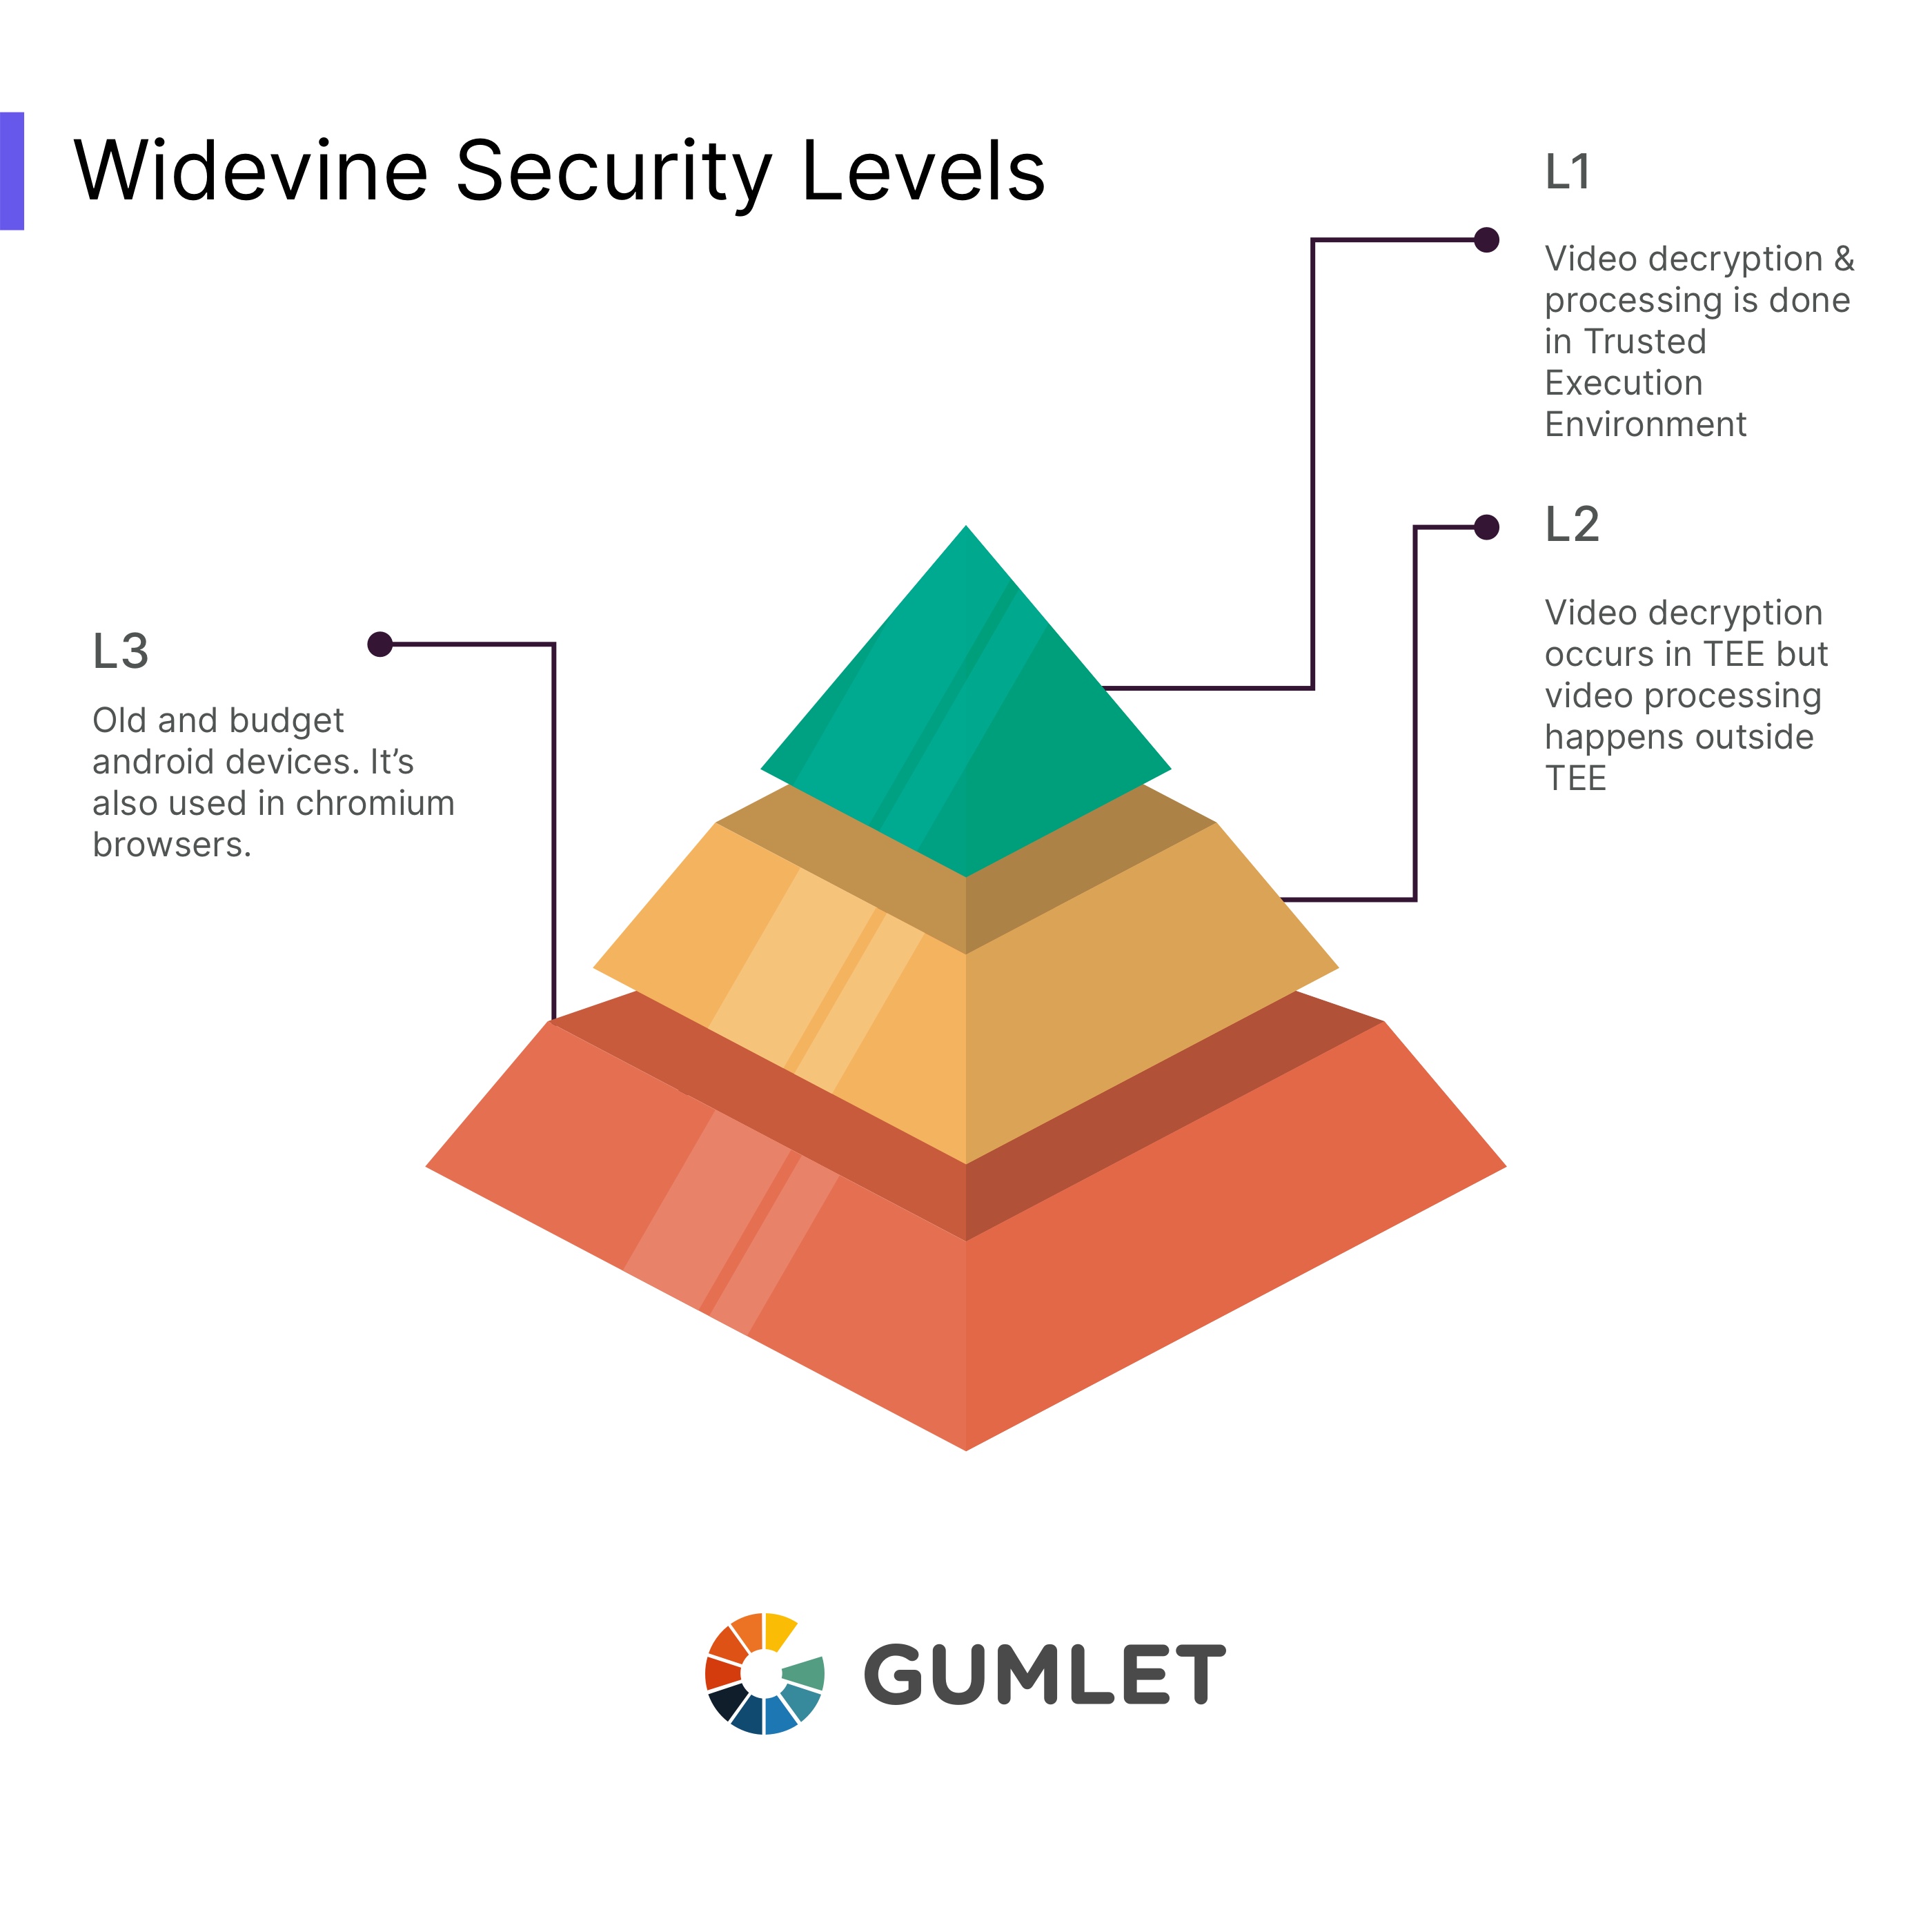 Widevine DRM Security Levels